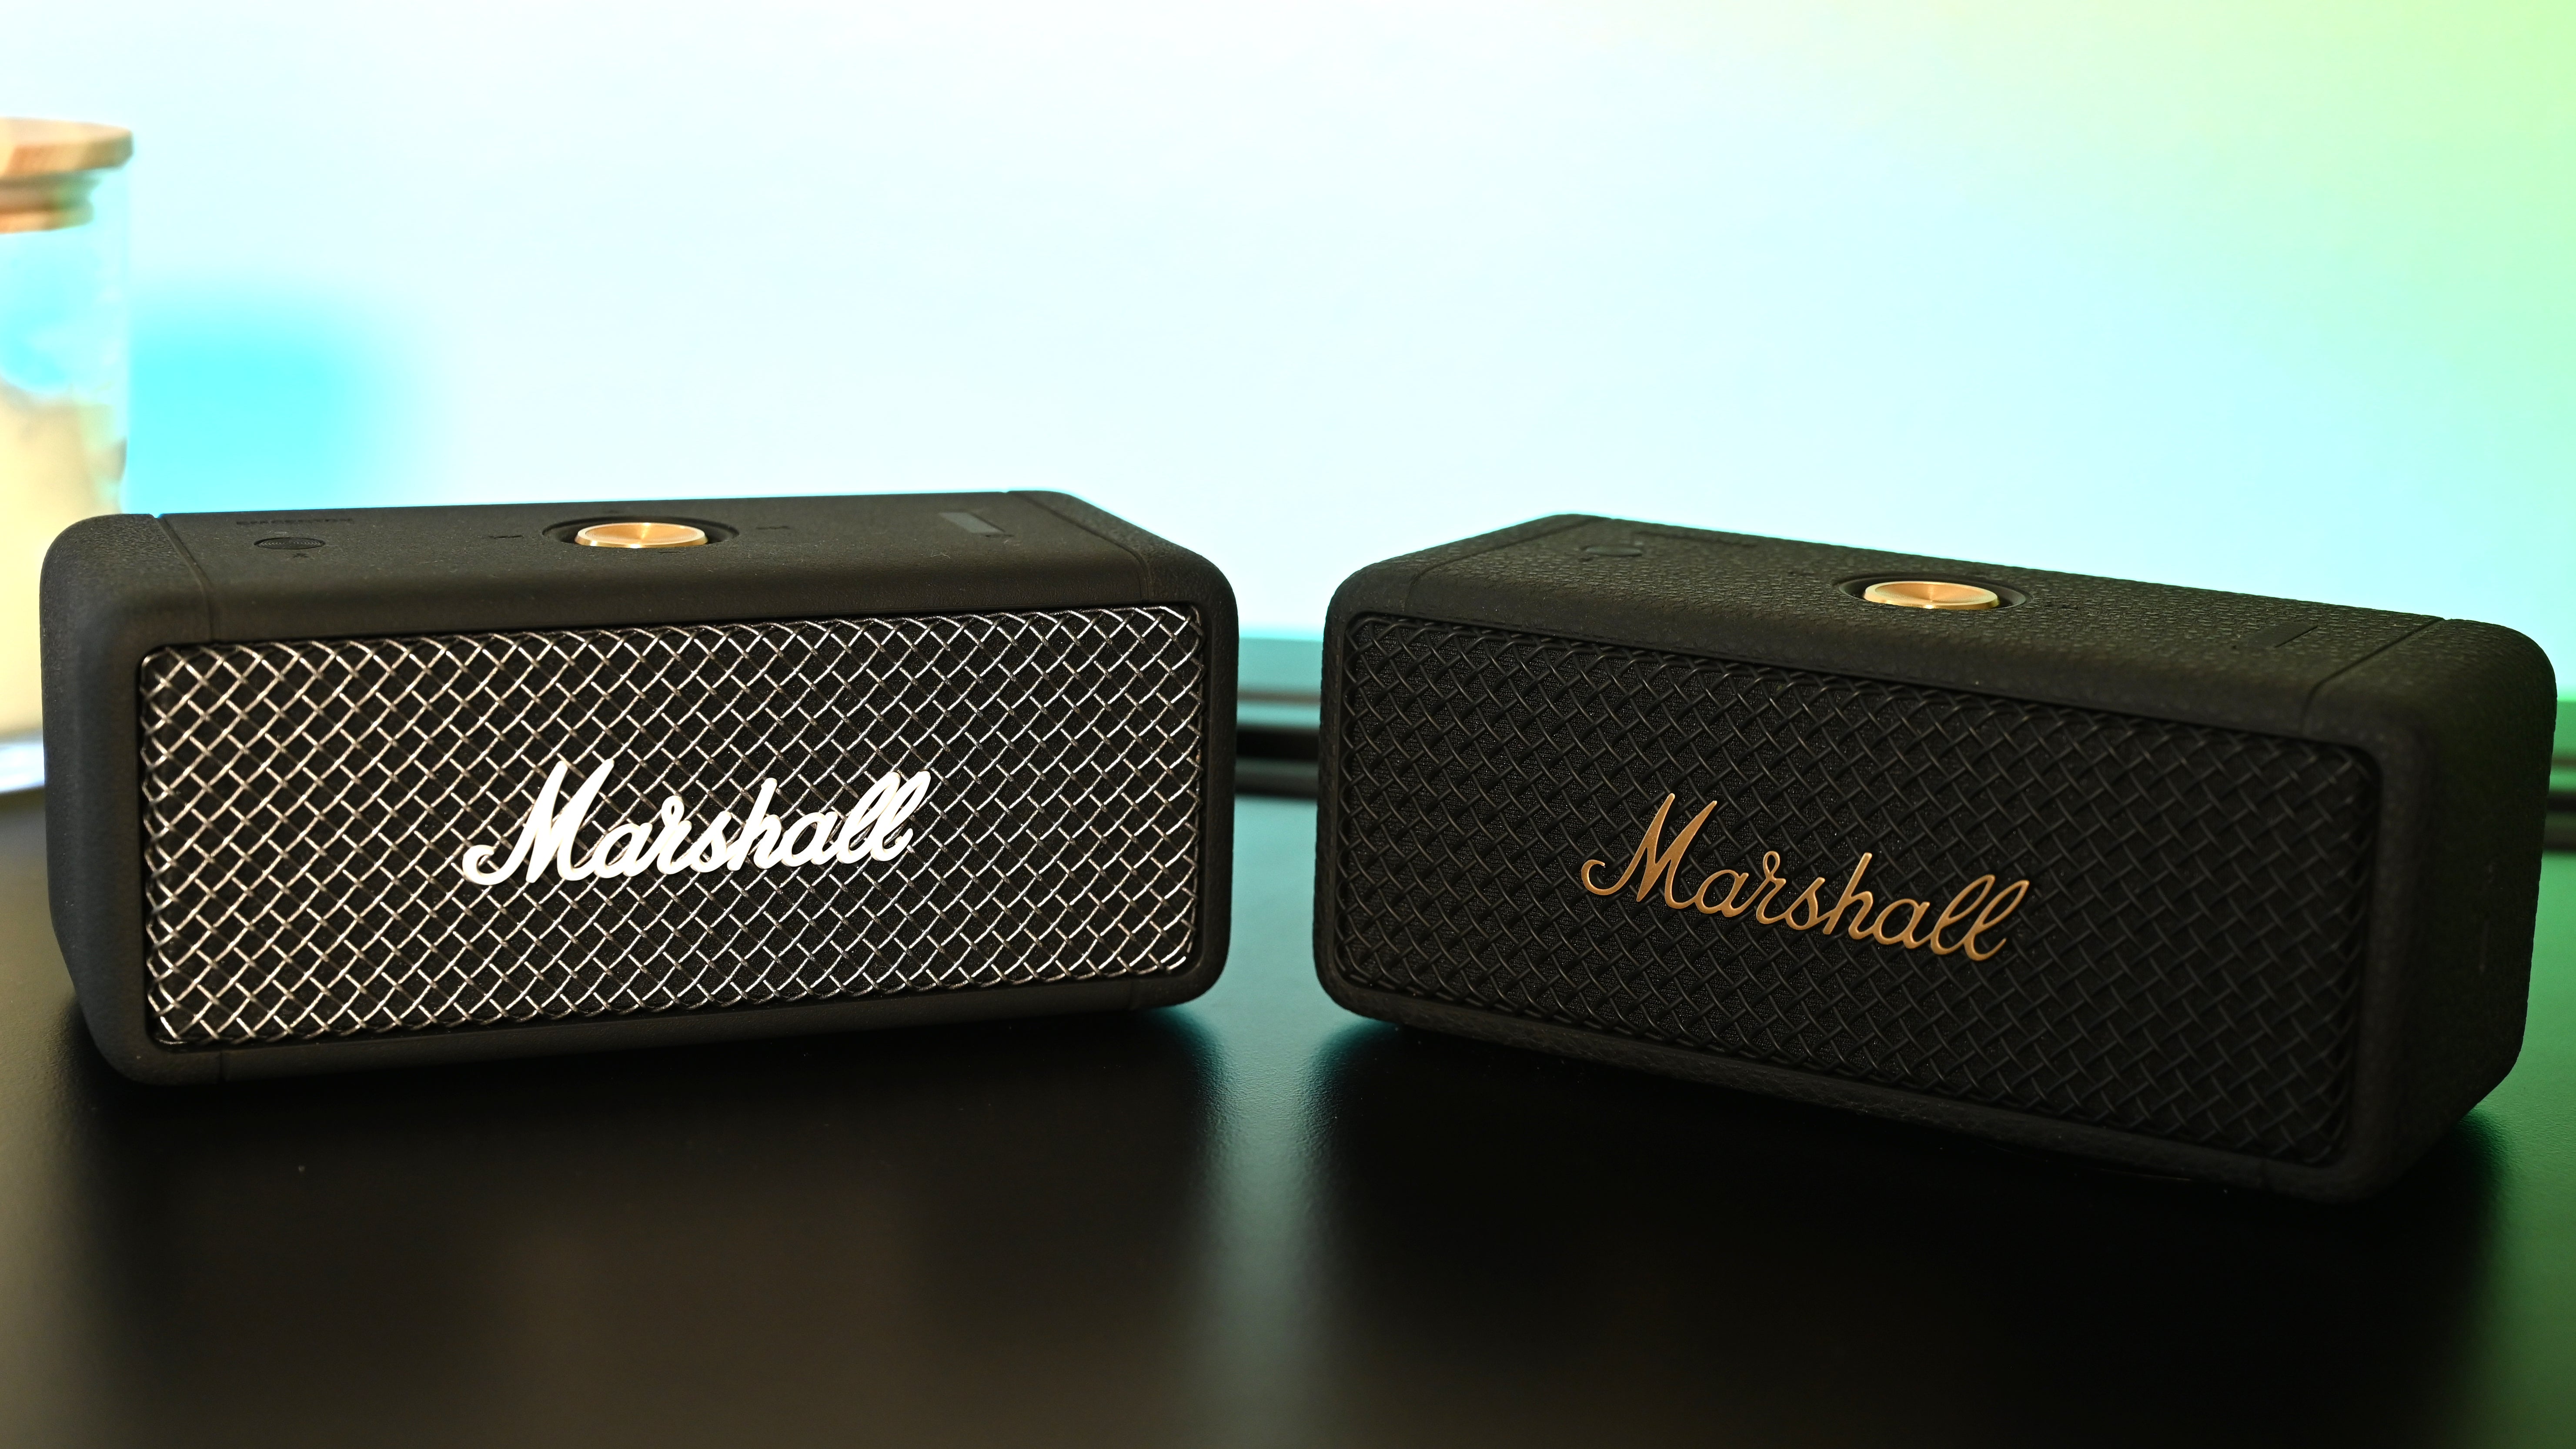 Marshall Willen and Emberton II review: Retro looks - 9to5Toys